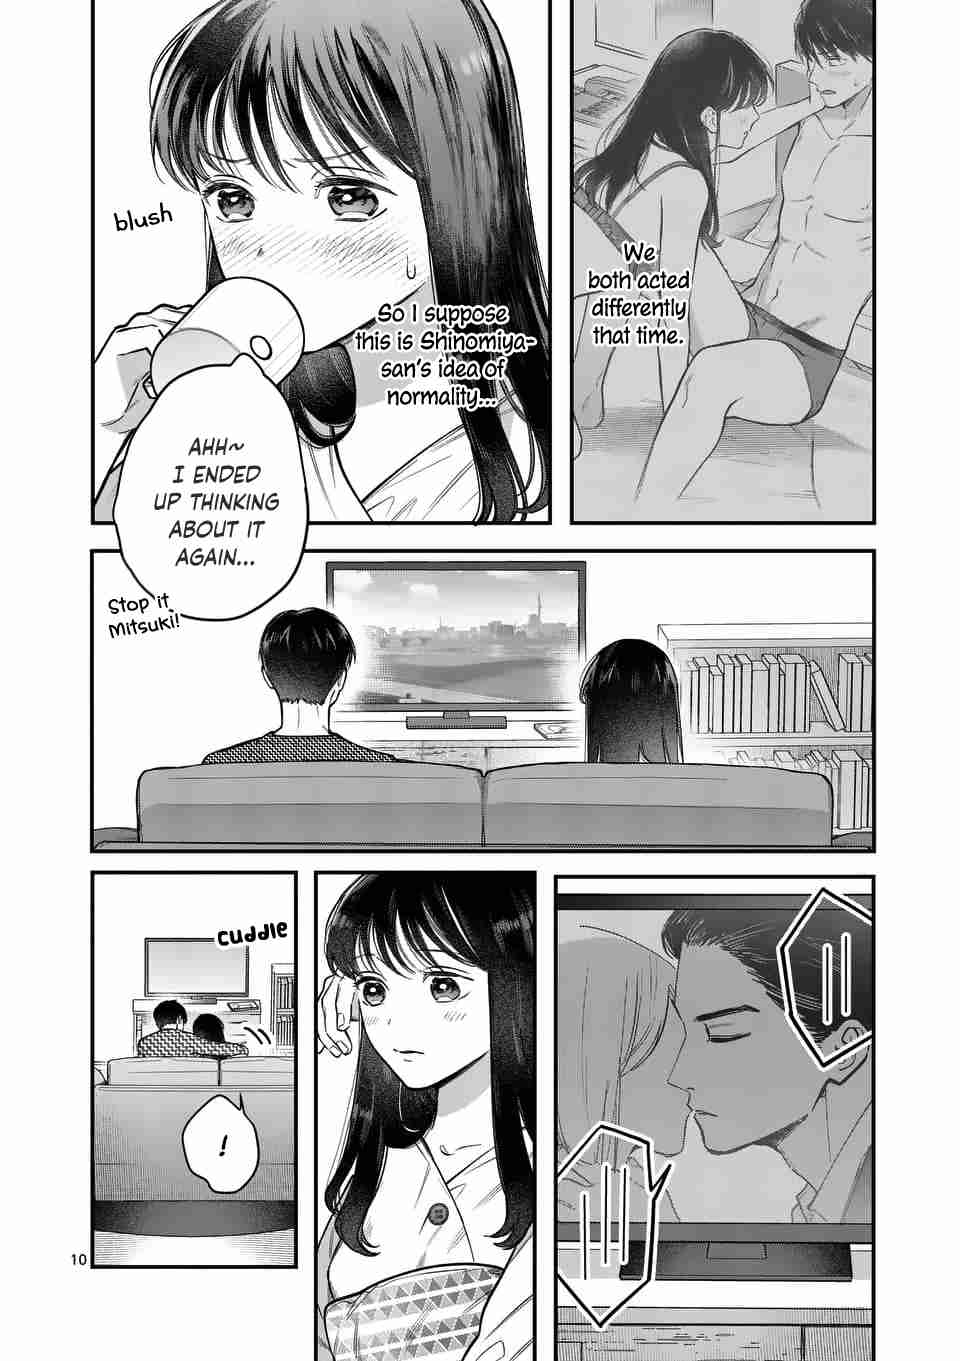 Is It Wrong to Get Done by a Girl? Vol. 1 Ch. 2 Kiss